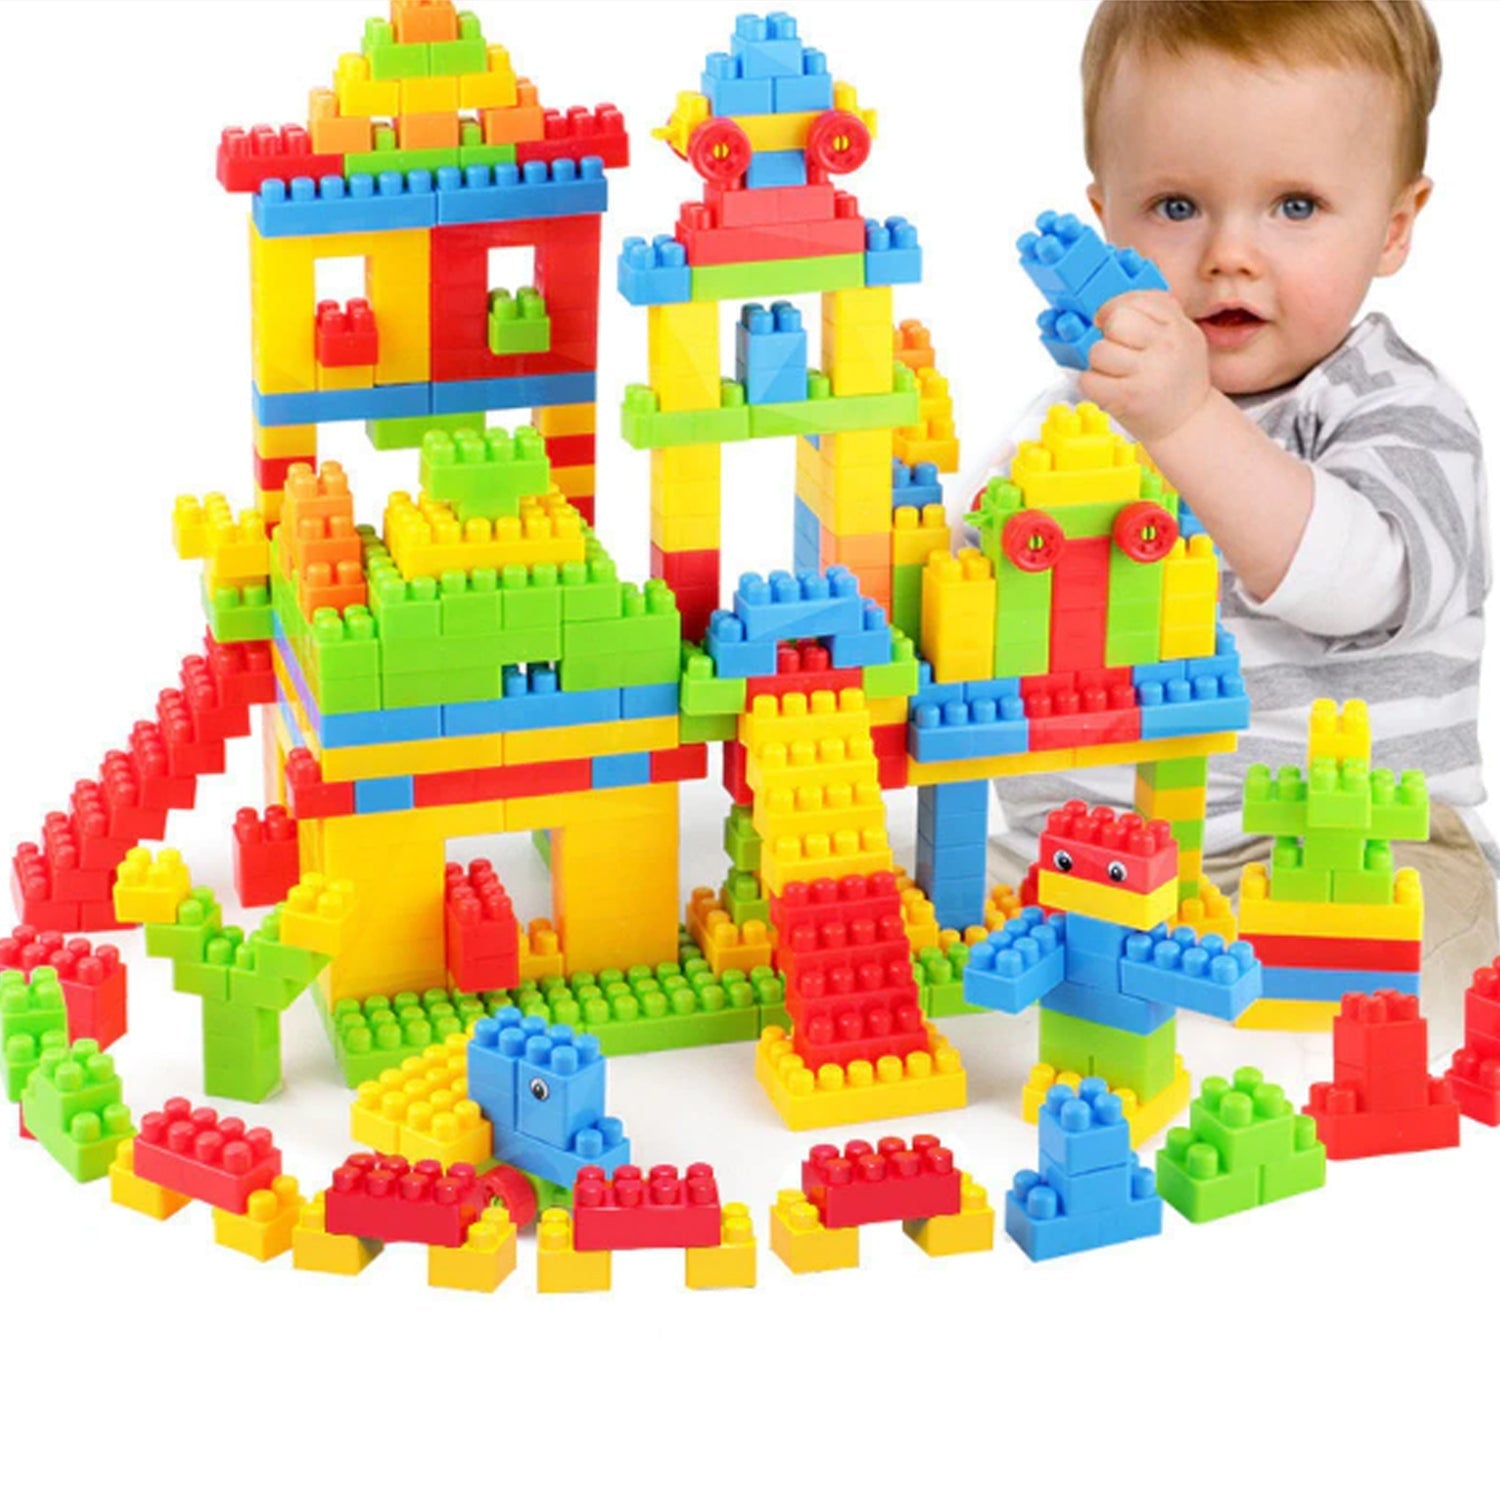 8077 60pc Building Blocks Early Learning Educational Toy for Kids DeoDap